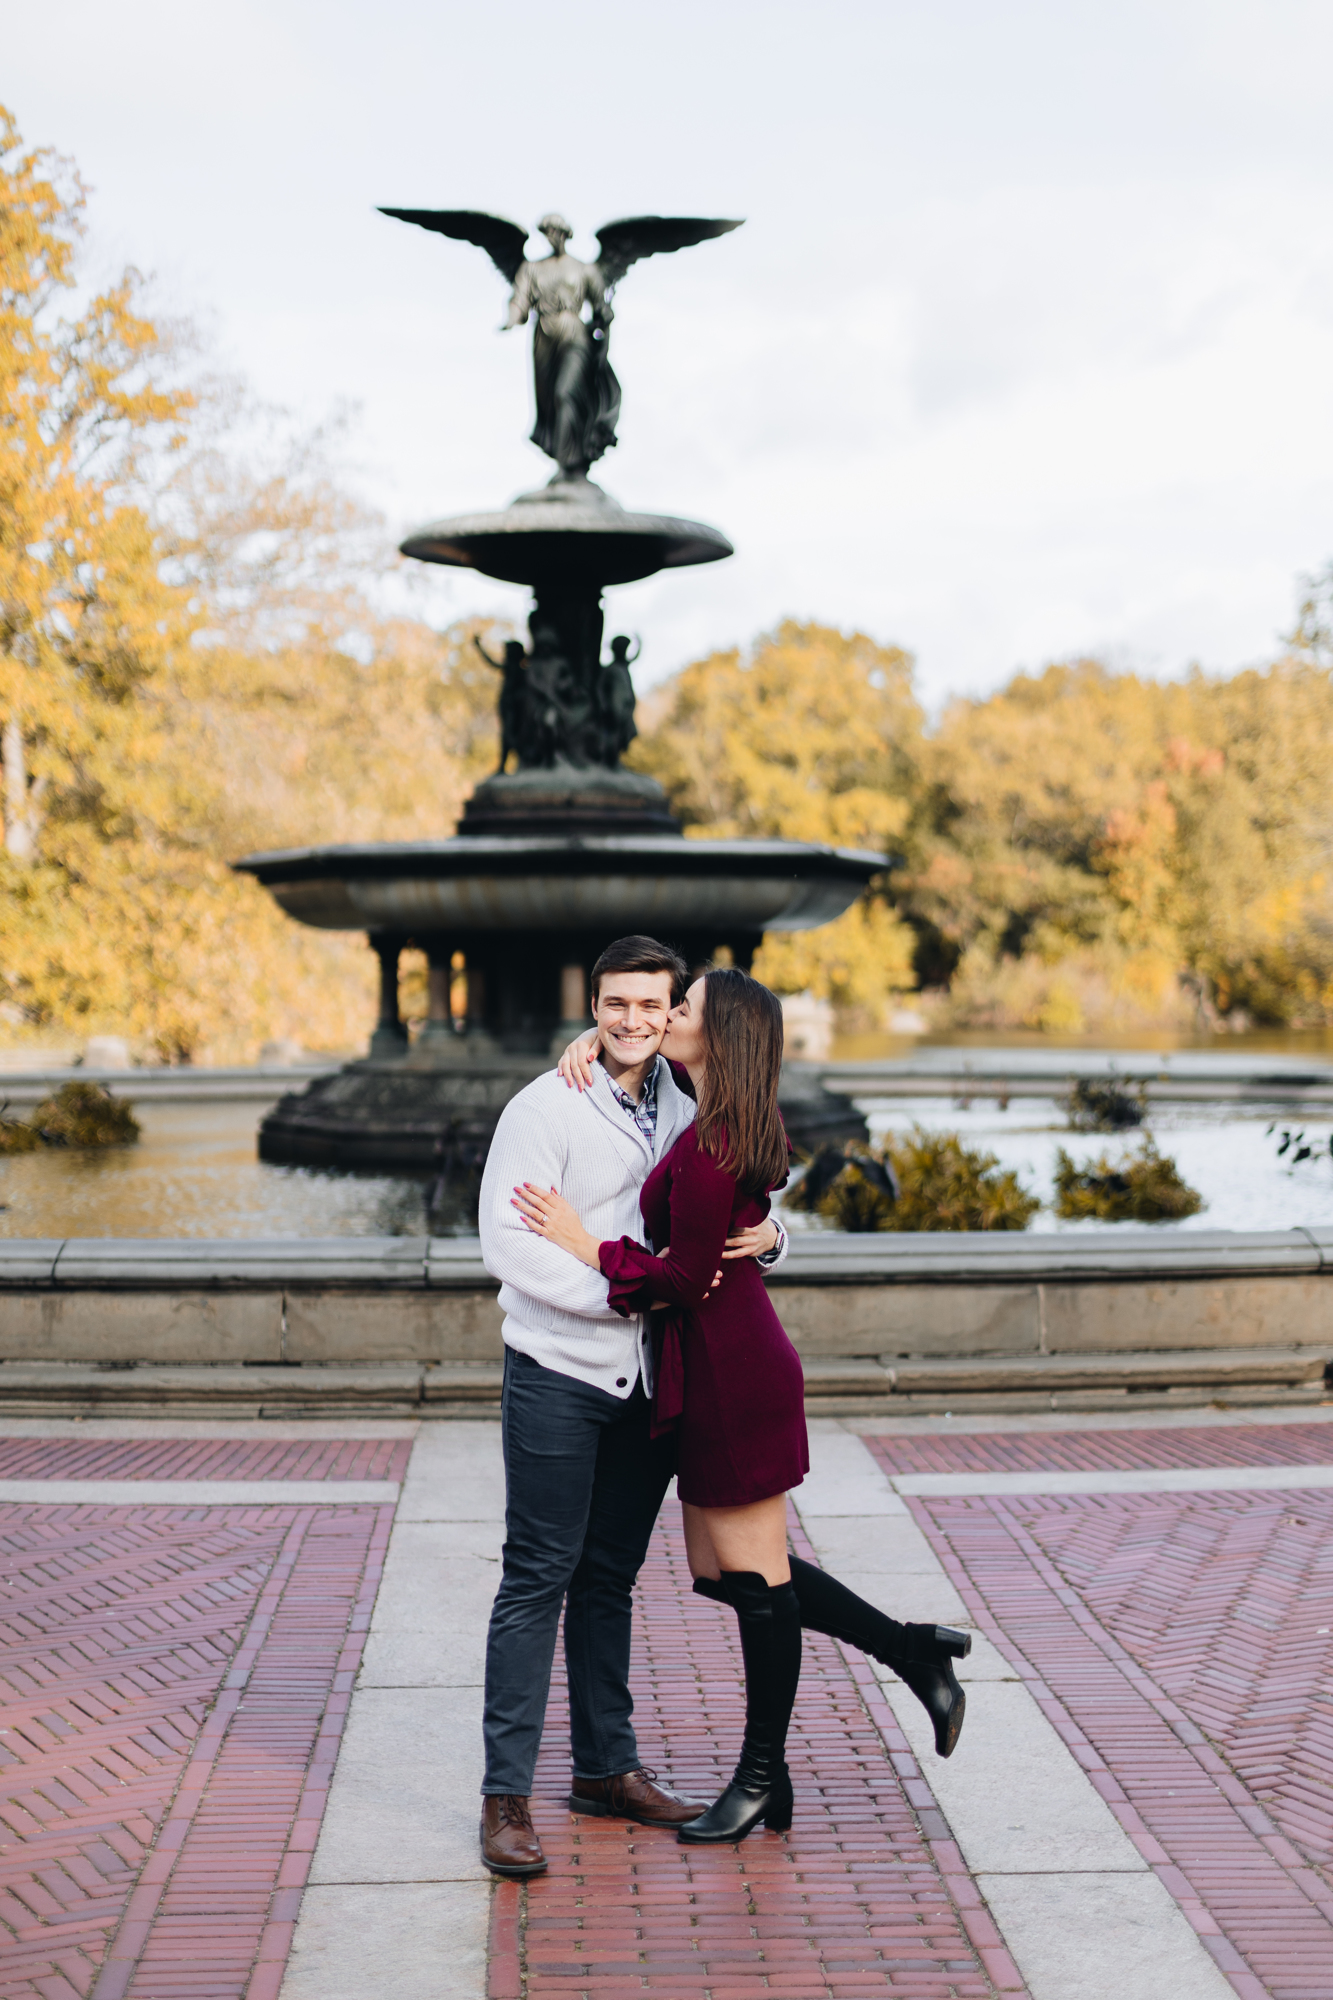 NYC's Central Park Engagement Photos